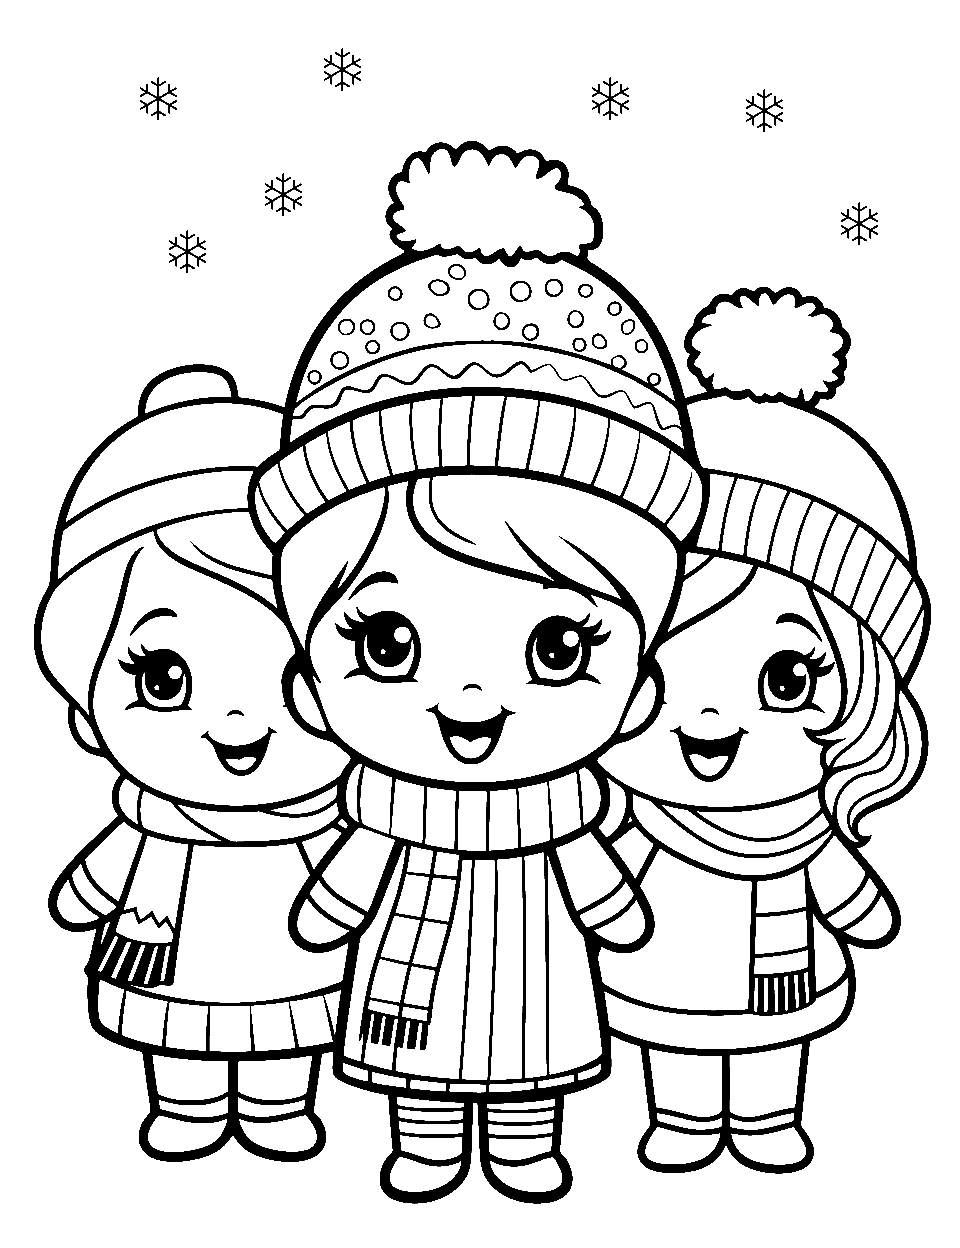 Winter Wonderland Coloring Page - Shopkins dressed in warm scarves and hats.